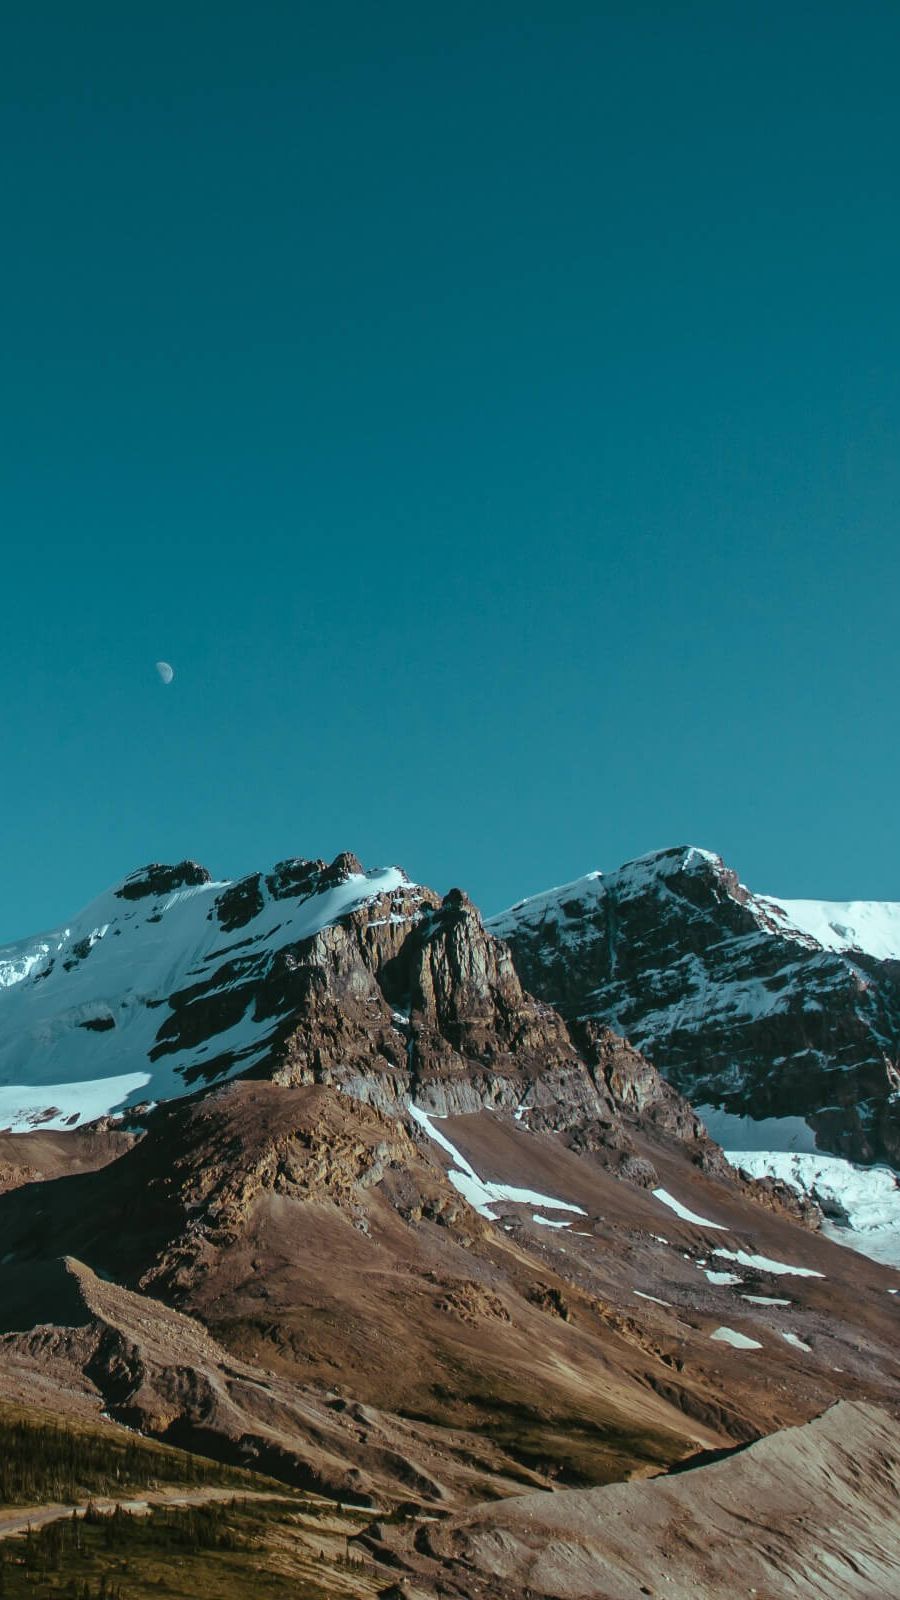 The Most Beautiful Mountain Wallpaper Backgrounds For iPhone  Glory of the  Snow